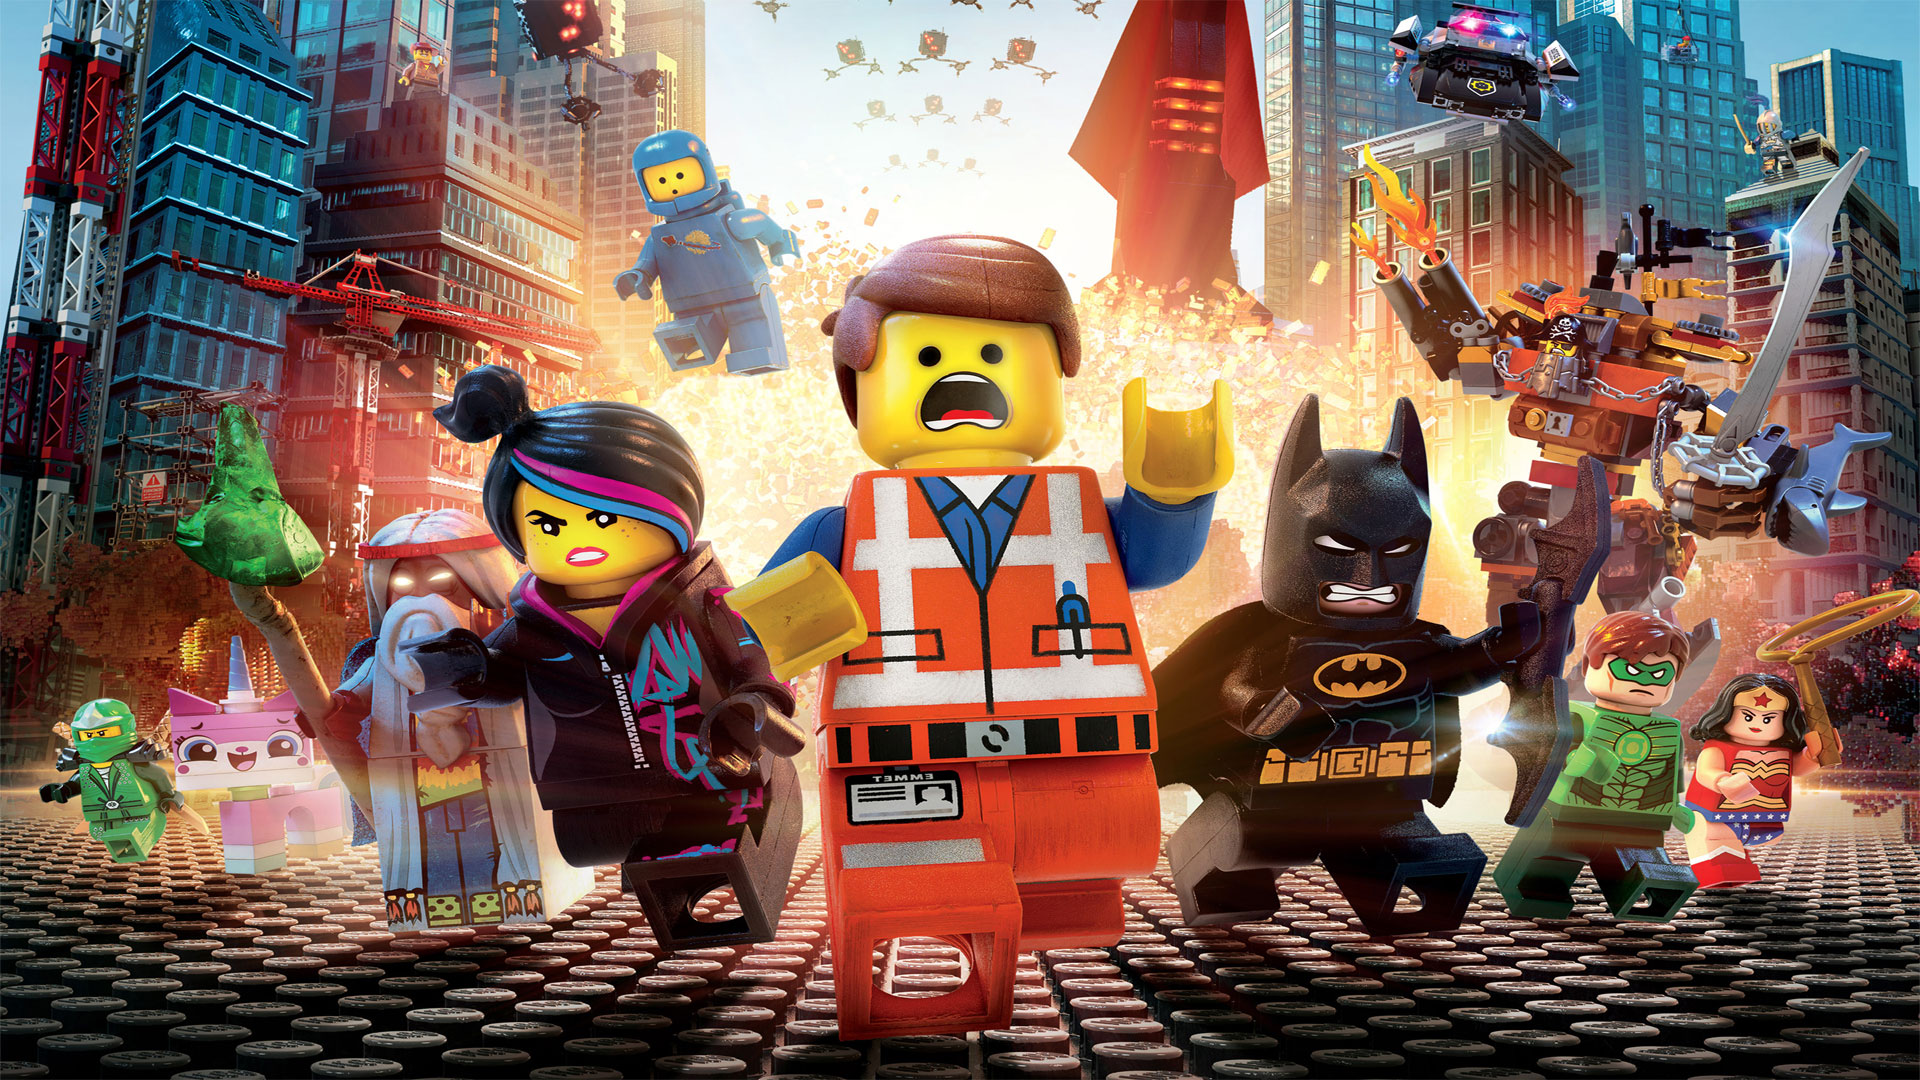 Lego Movie Backgrounds Download HD Wallpapers